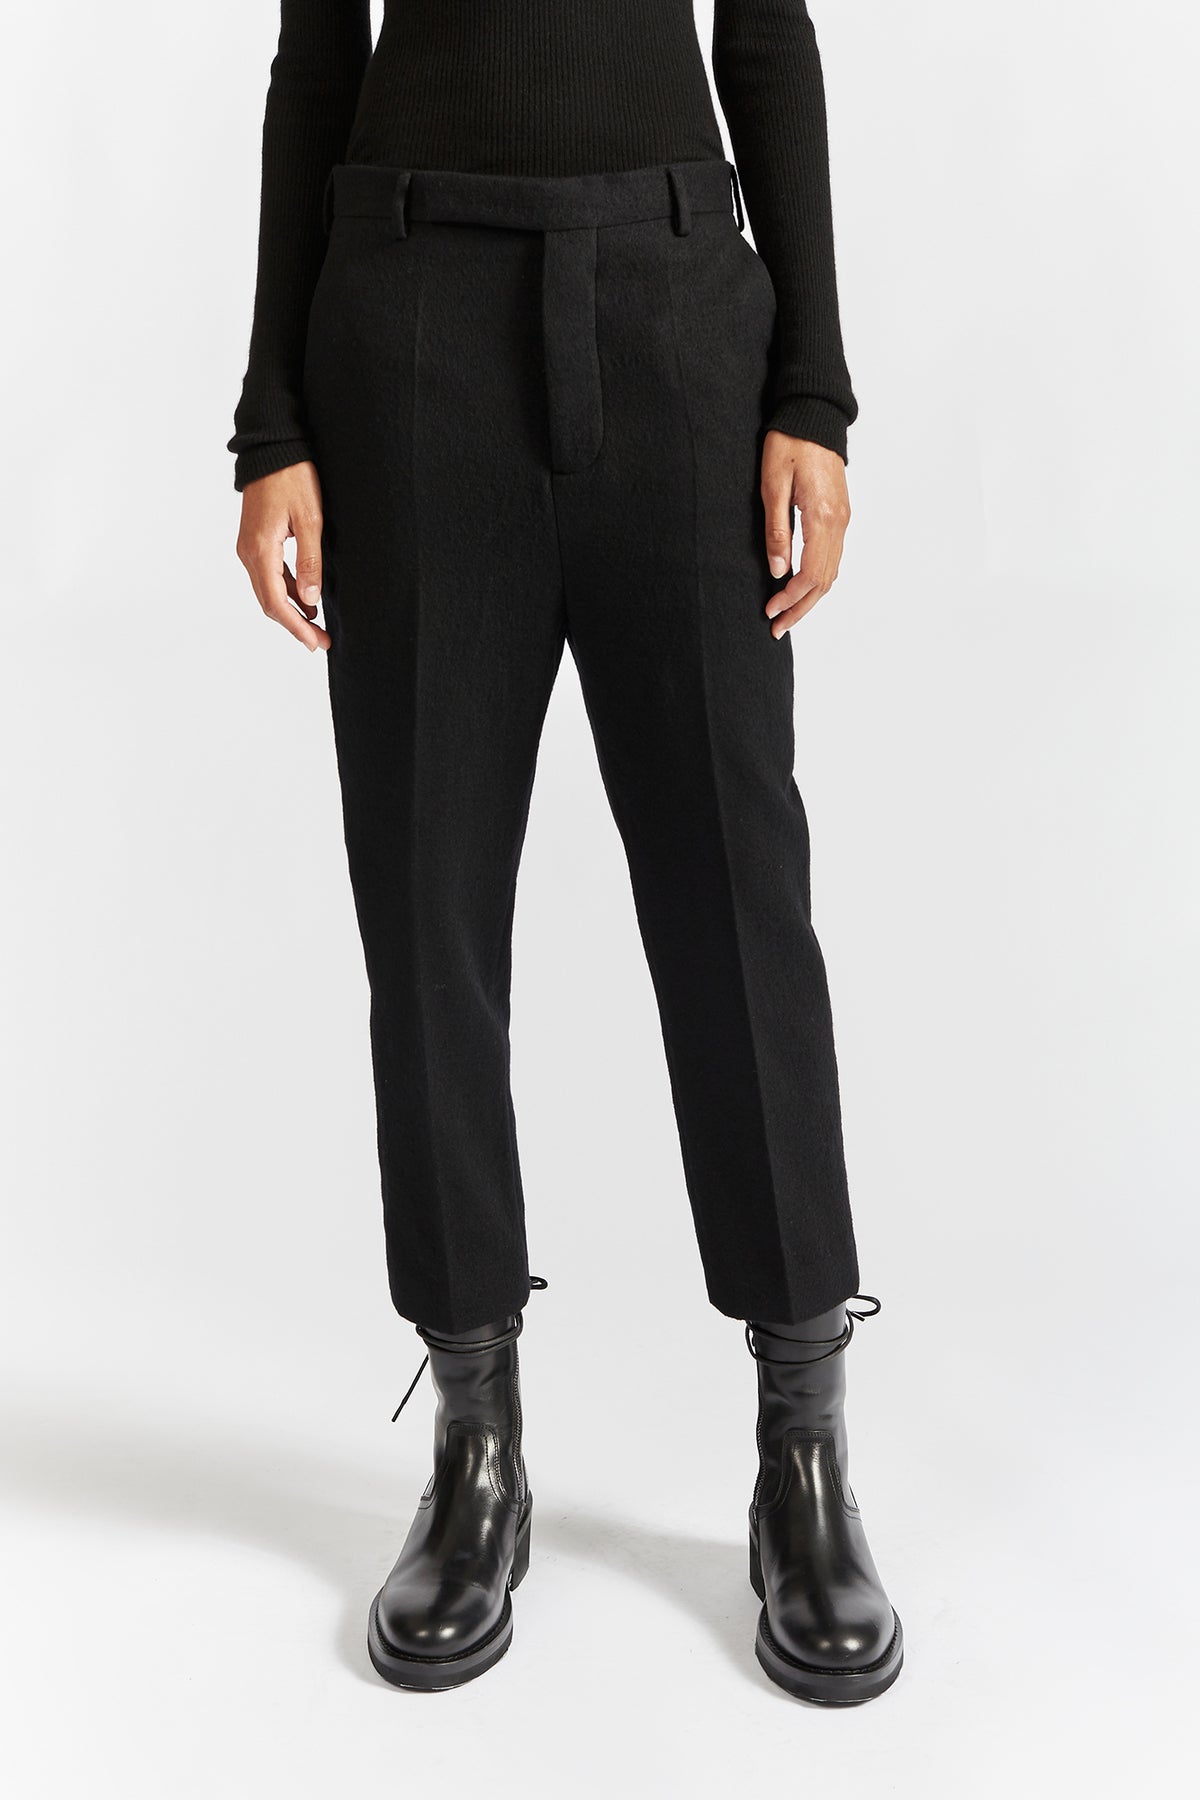 rick owens astaire trousers-